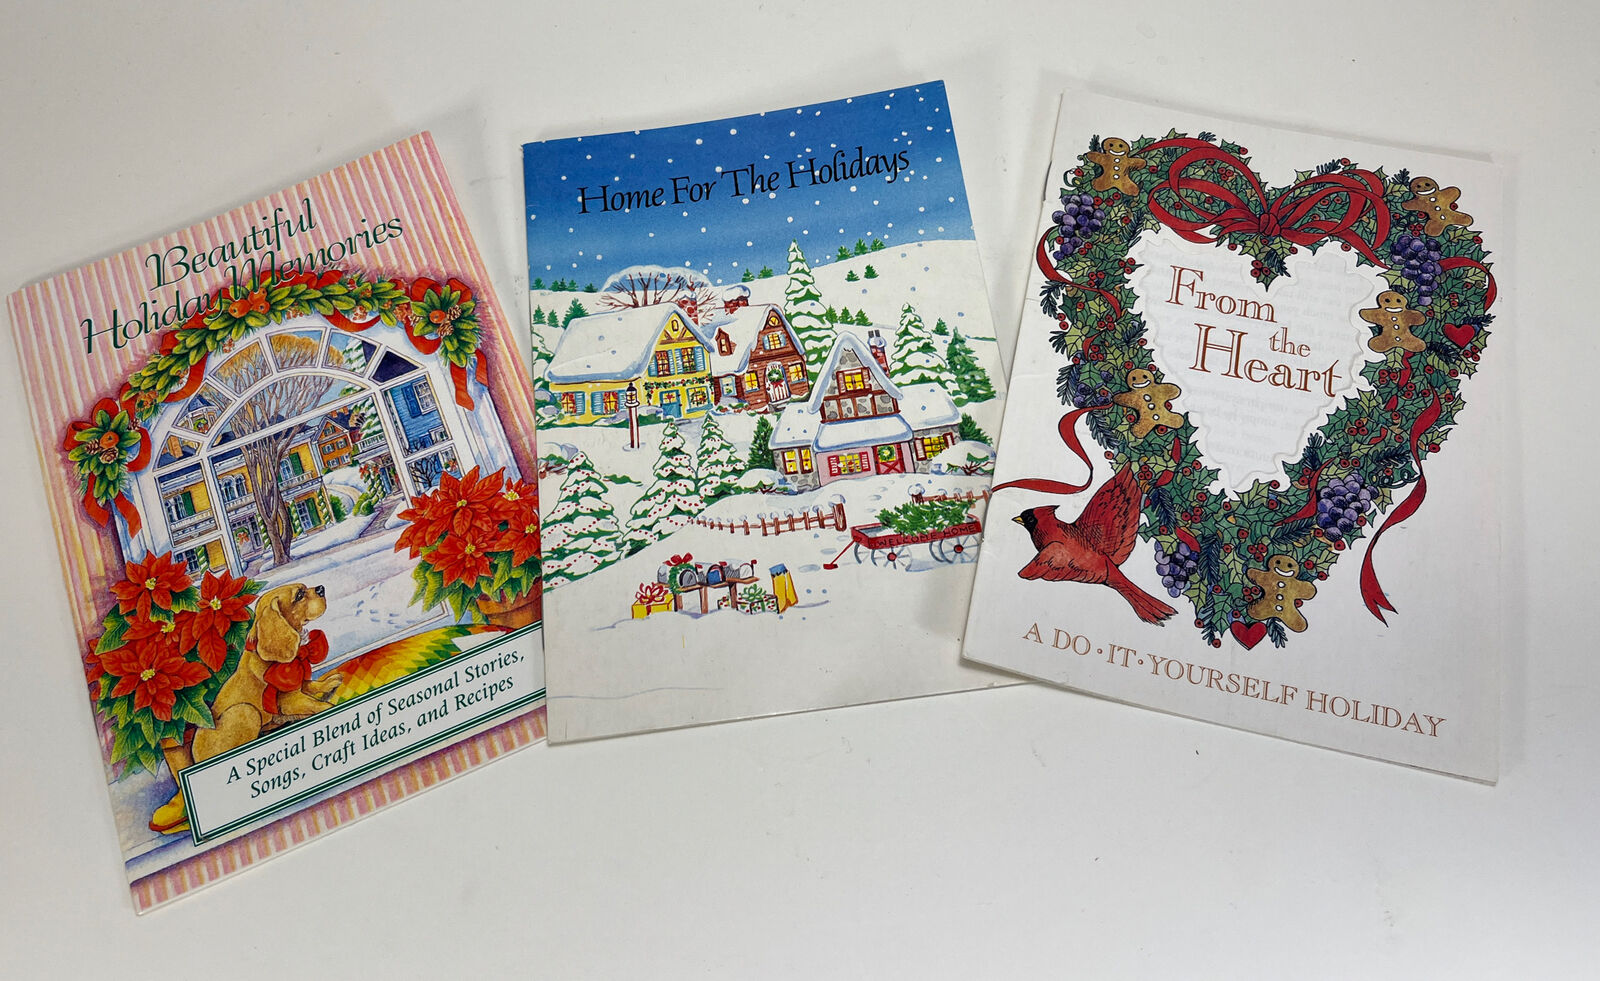 3 Vintage Paralyzed Veterans Association Christmas Holiday Booklets